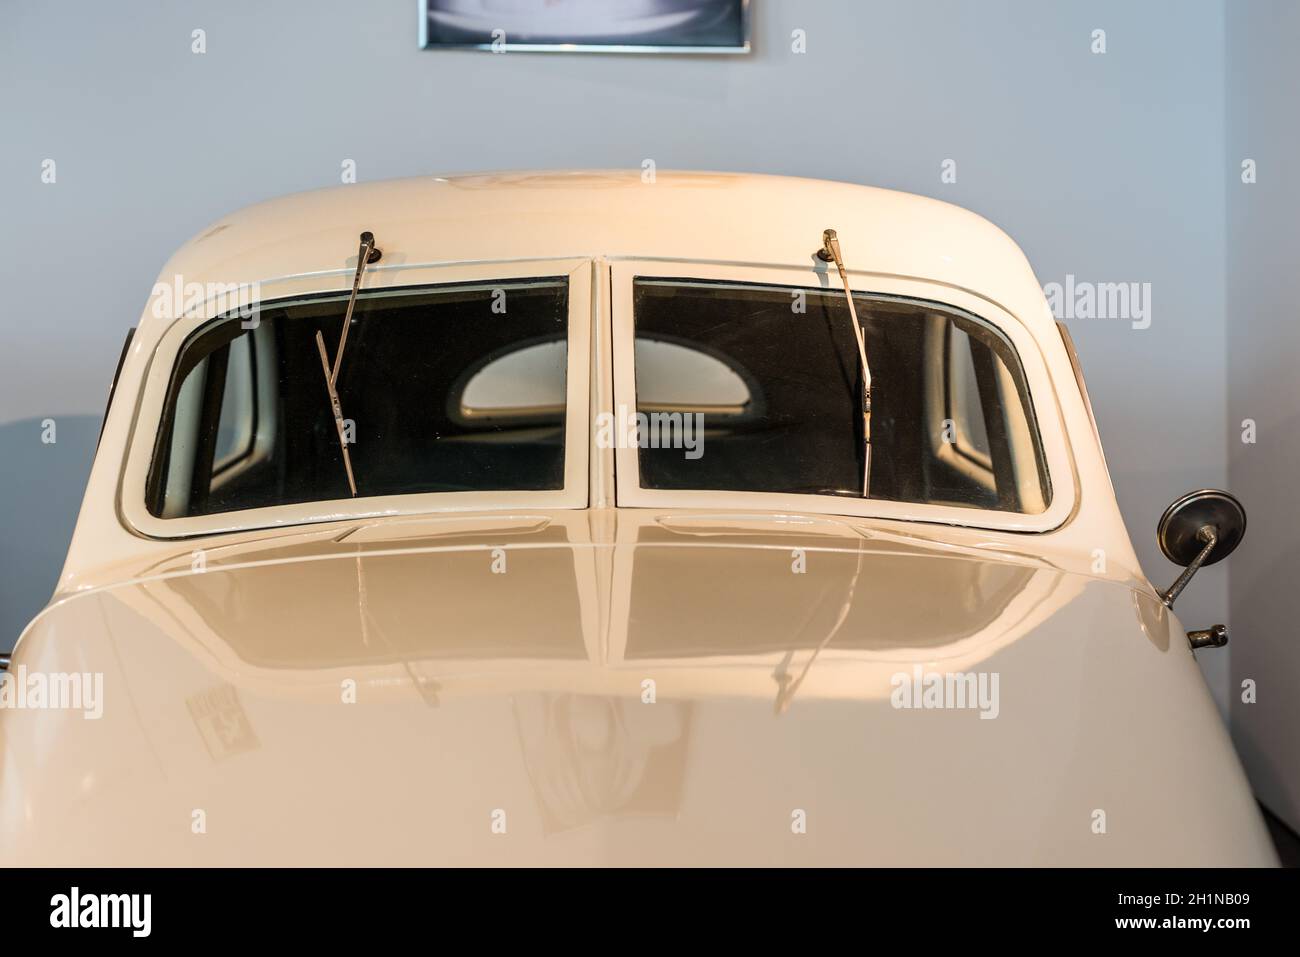 Malaga, Spain - December 7, 2016: Close up view of Cord Westchester 1937 USA car displayed at Malaga Automobile and Fashion Museum in Spain. Stock Photo